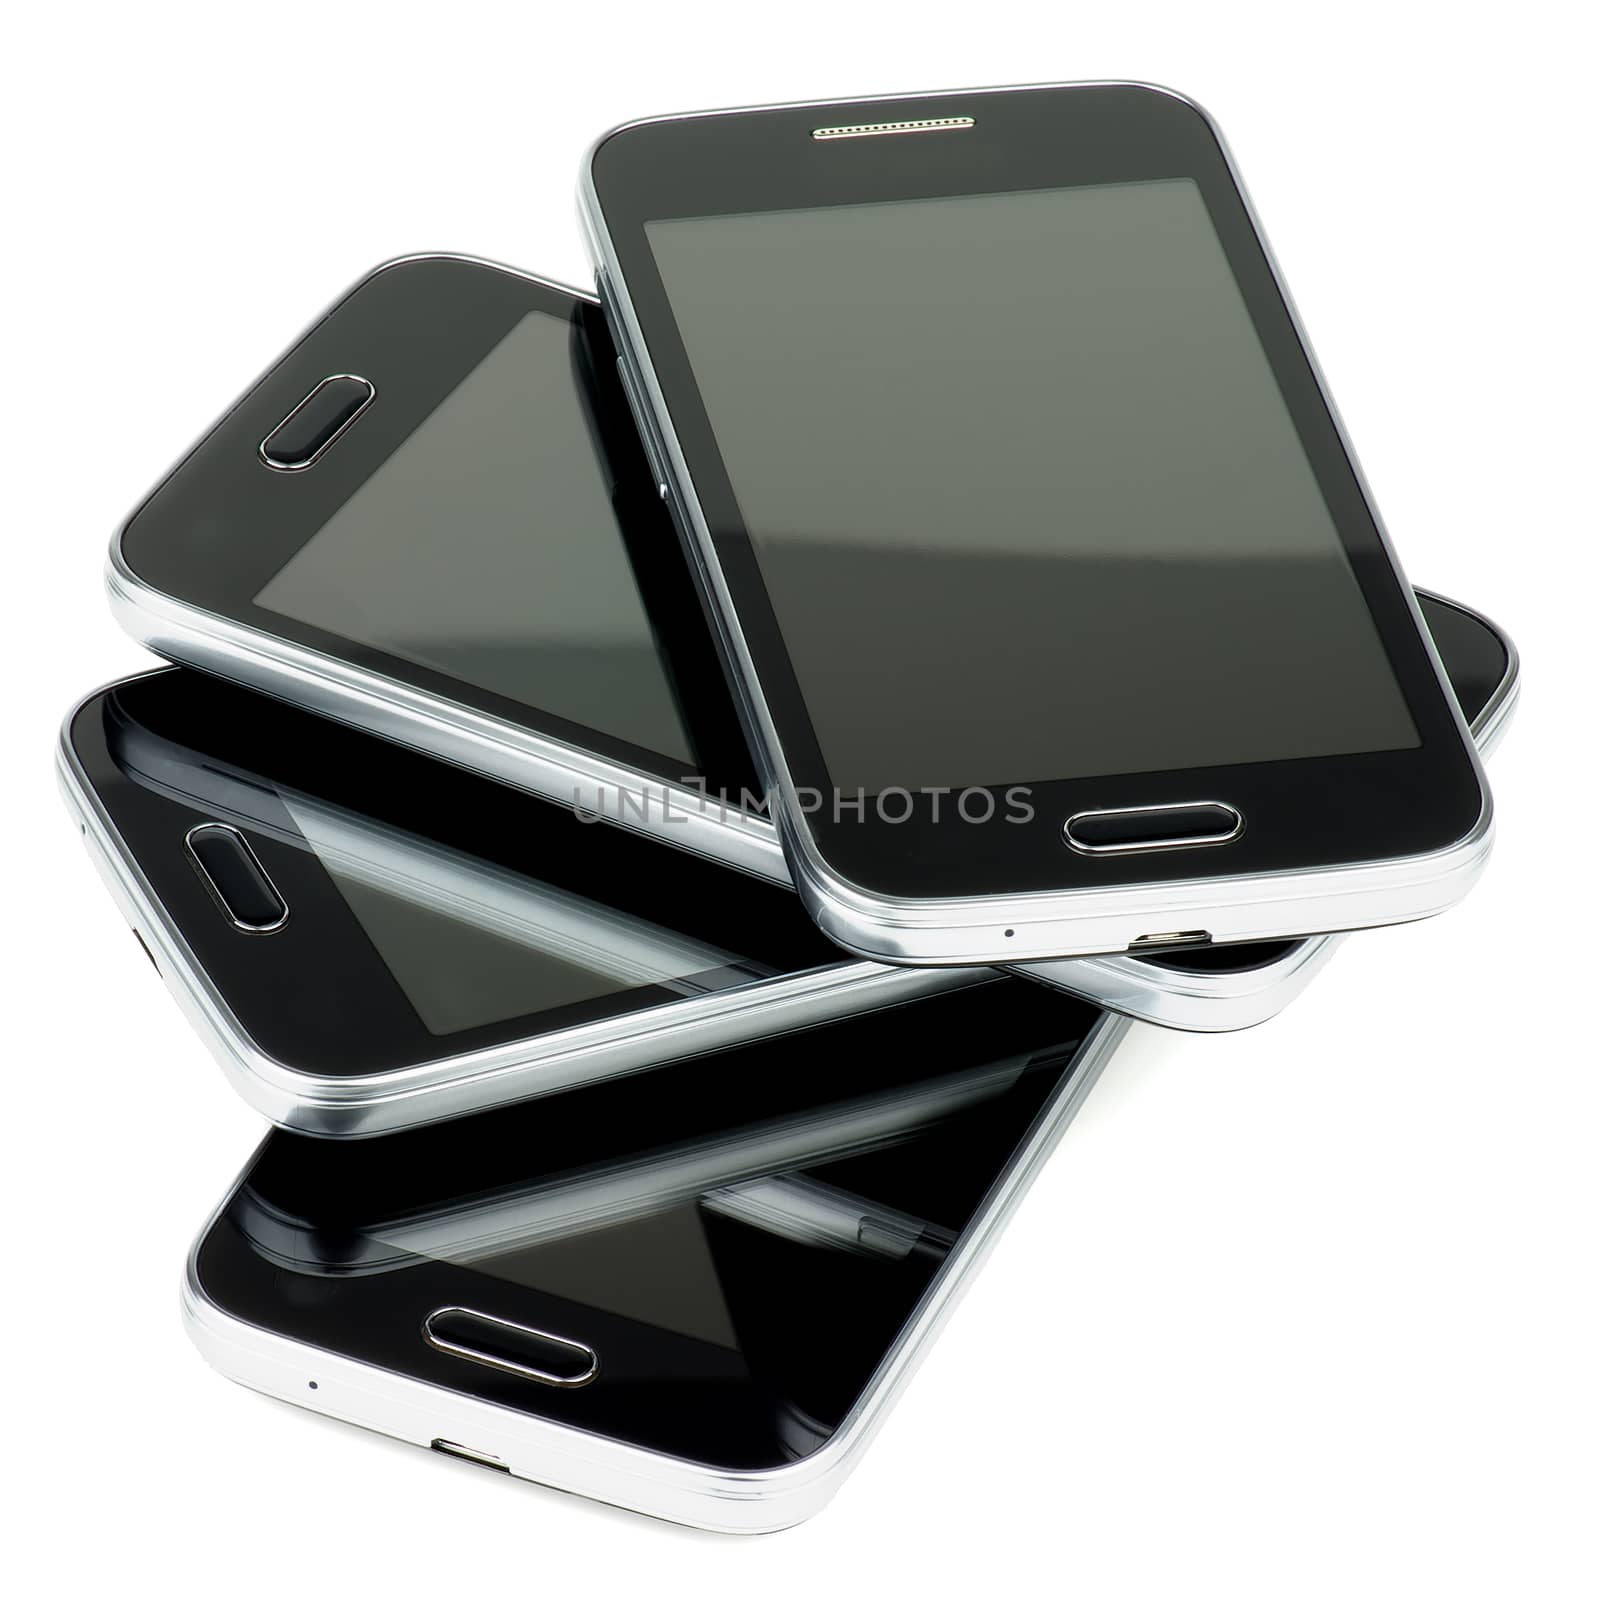 Arrangement of Four Contemporary Black and Silver Smartphones isolated on white background